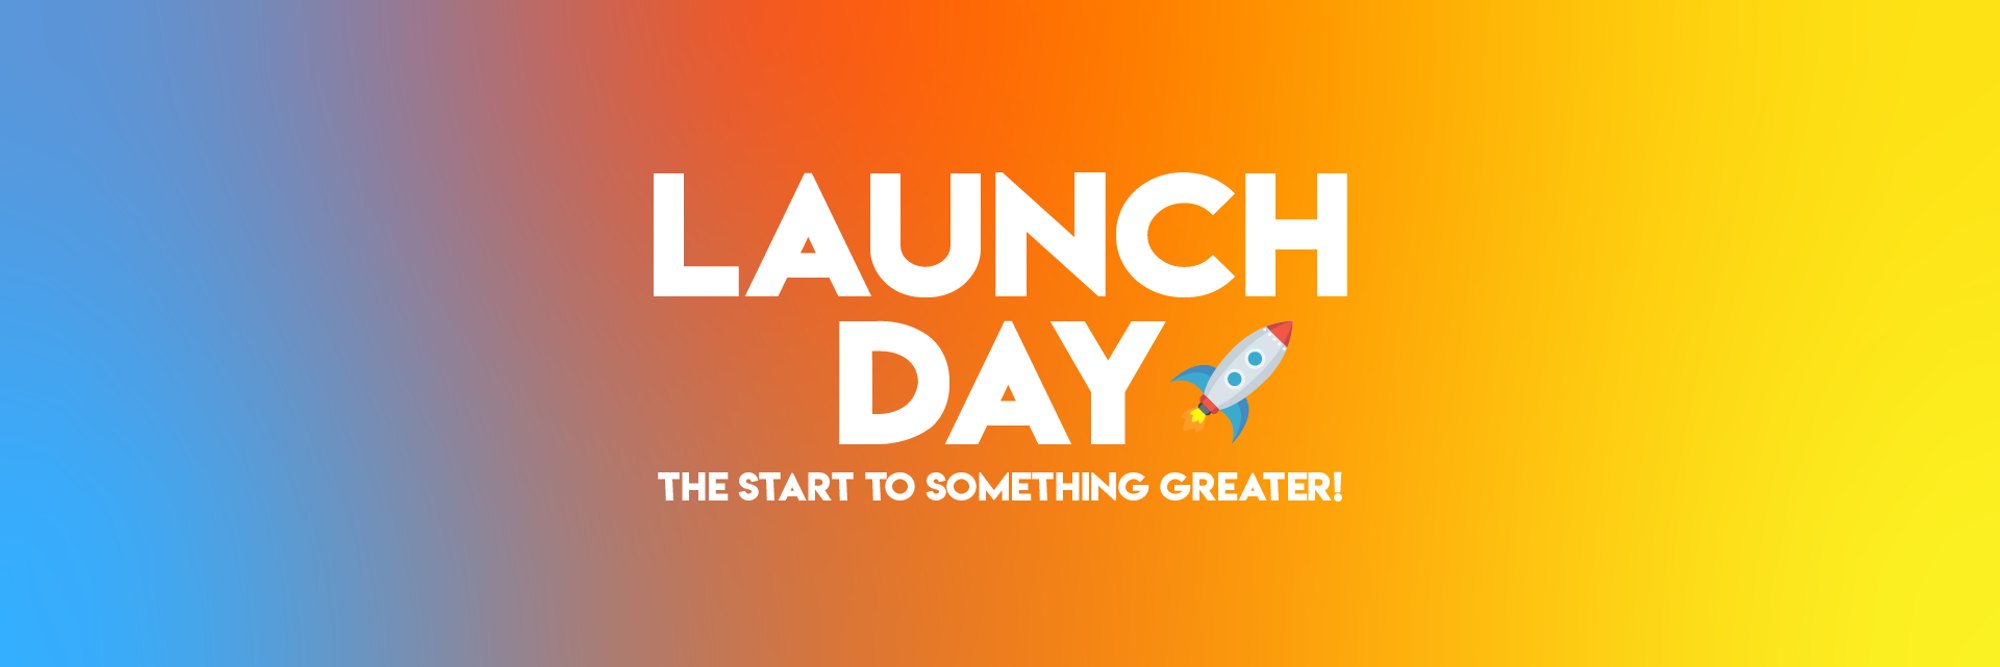 Launch Day! 🎉